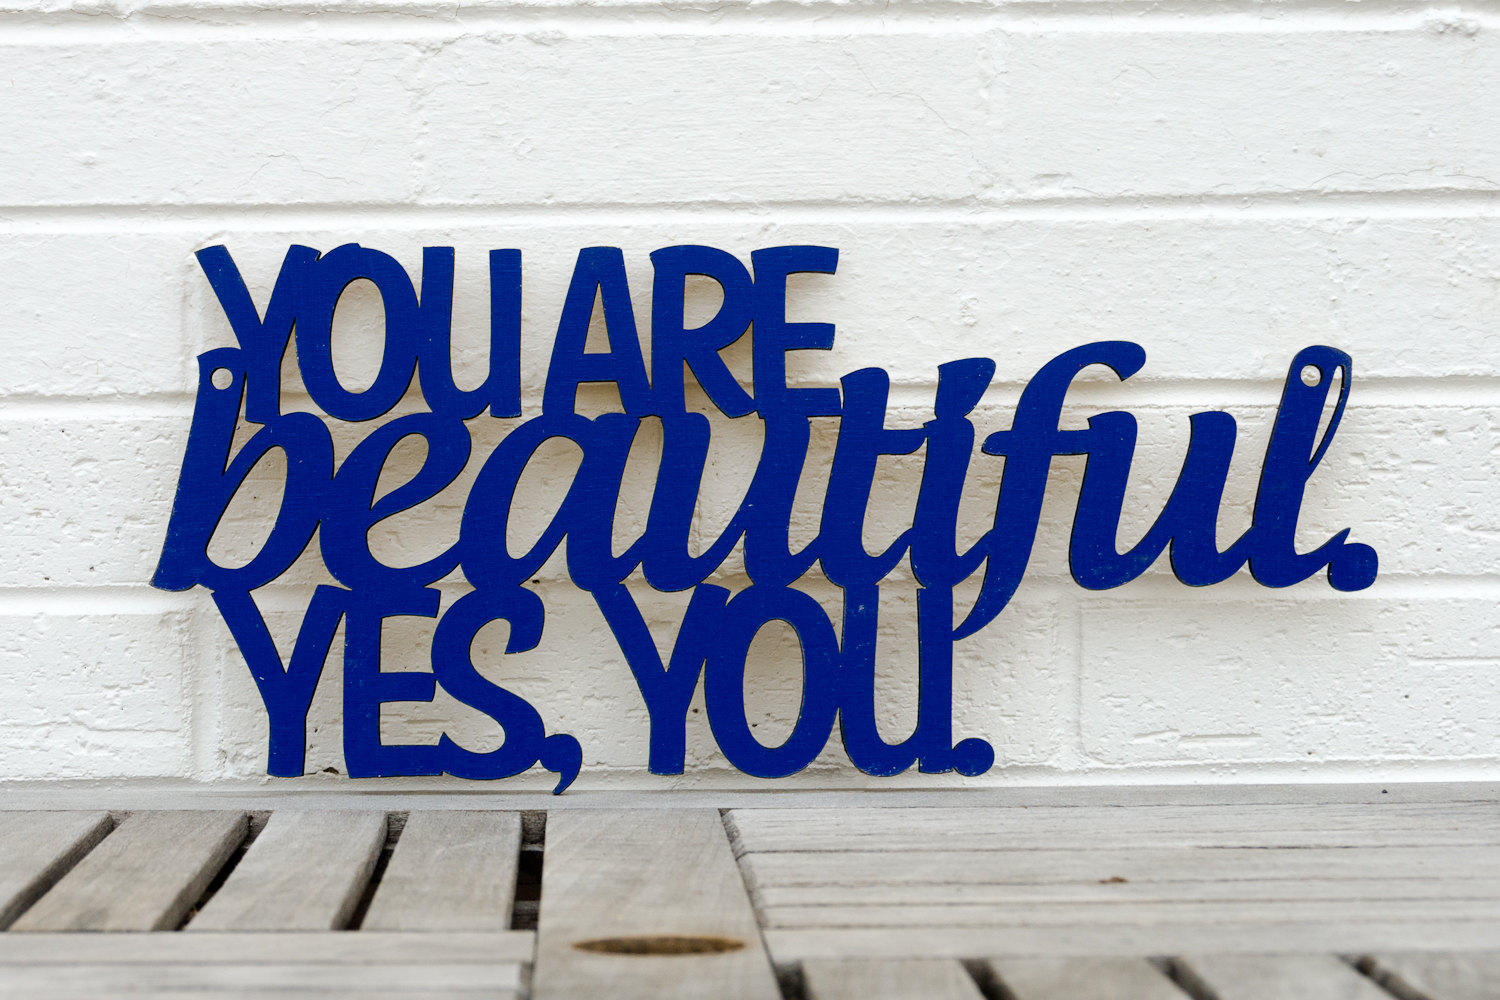 You are beautiful на русском